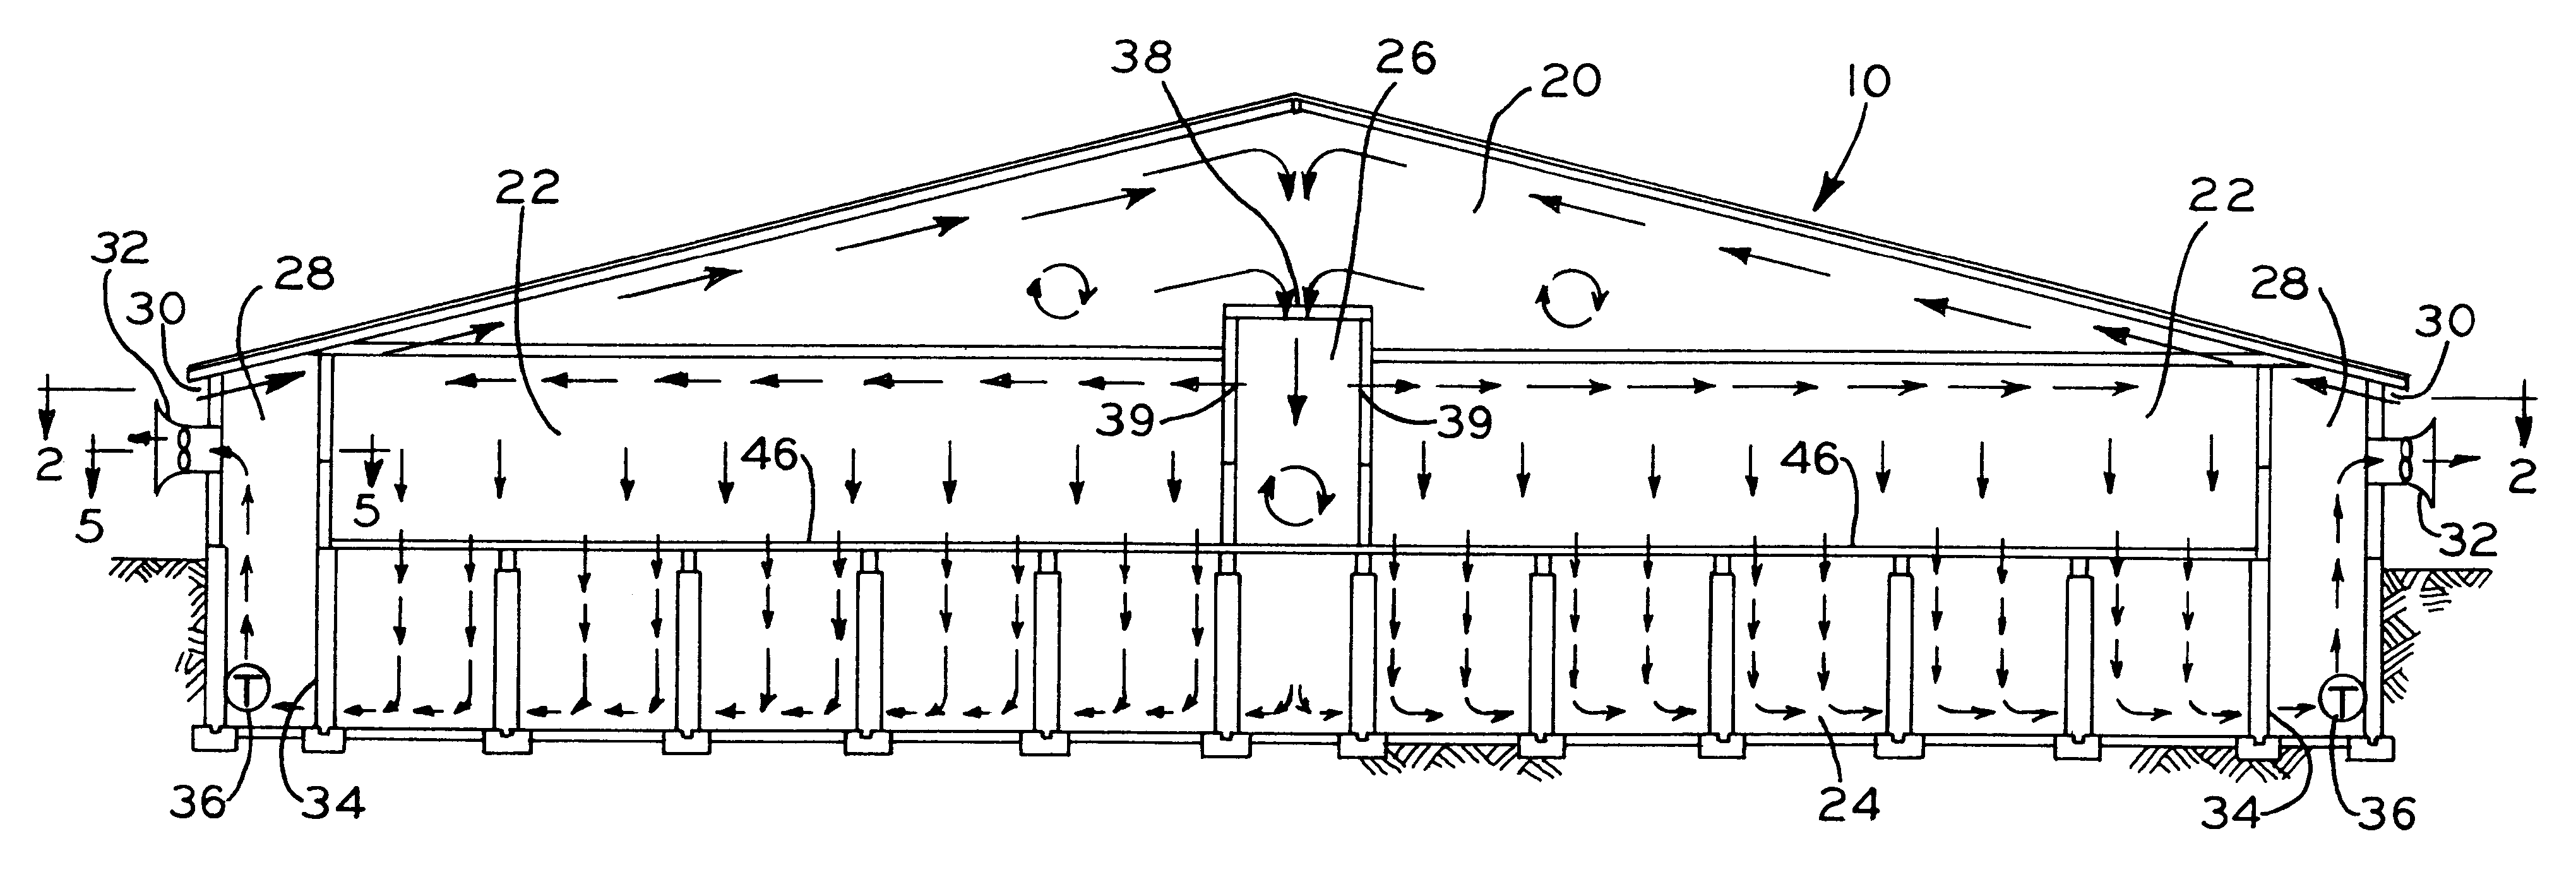 Individual room duct and ventilation system for livestock production building